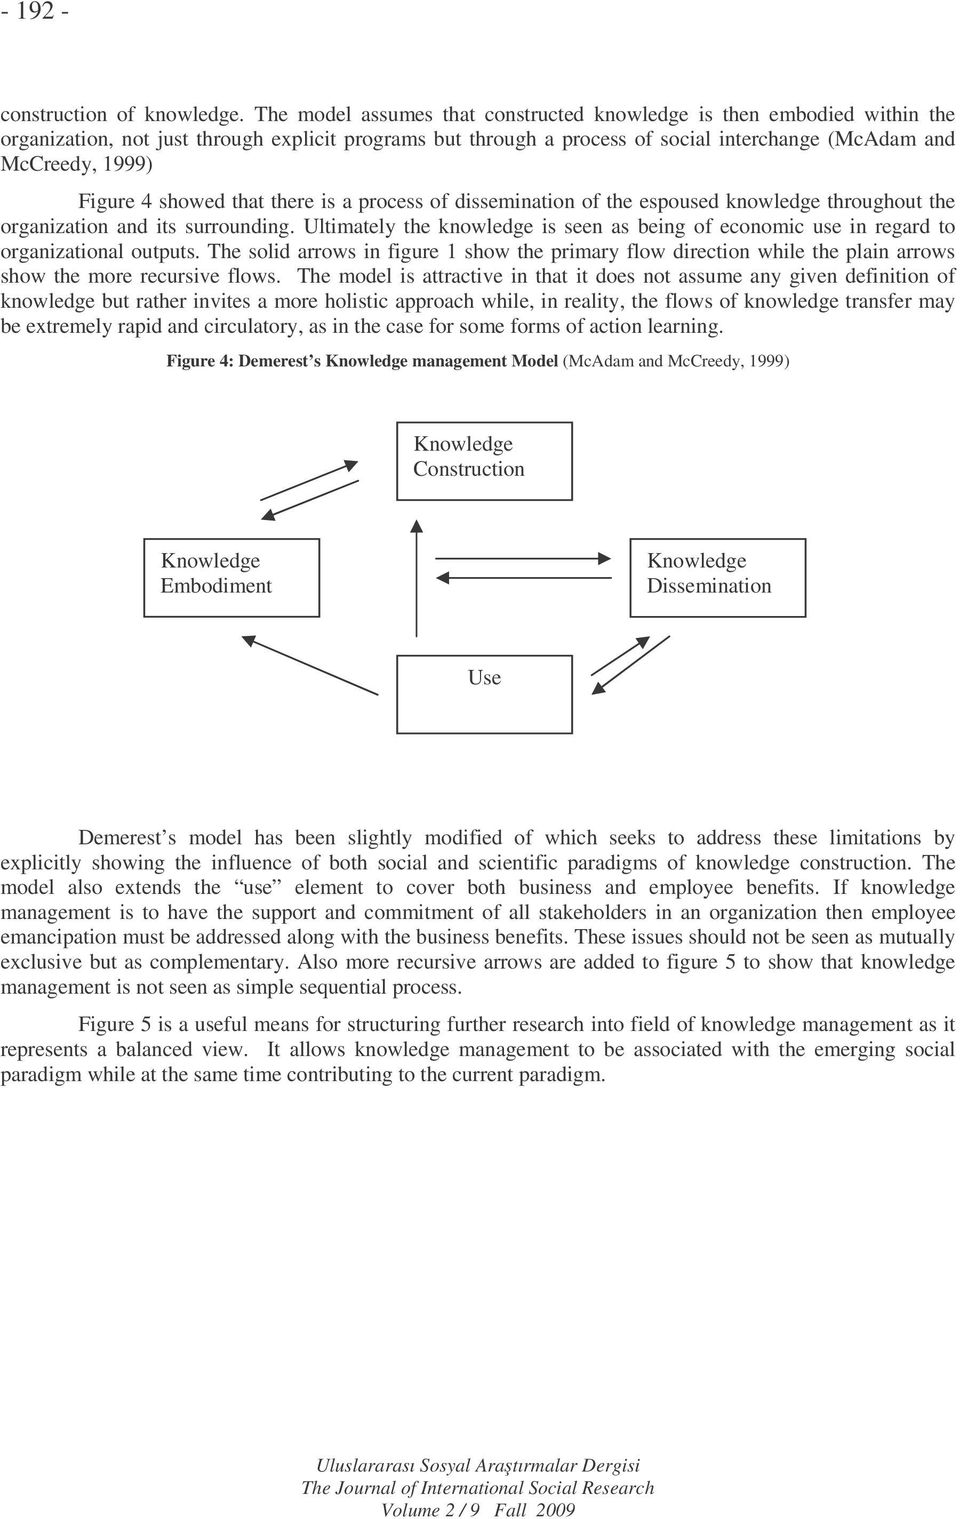 Figure 4 showed that there is a process of dissemination of the espoused knowledge throughout the organization and its surrounding.